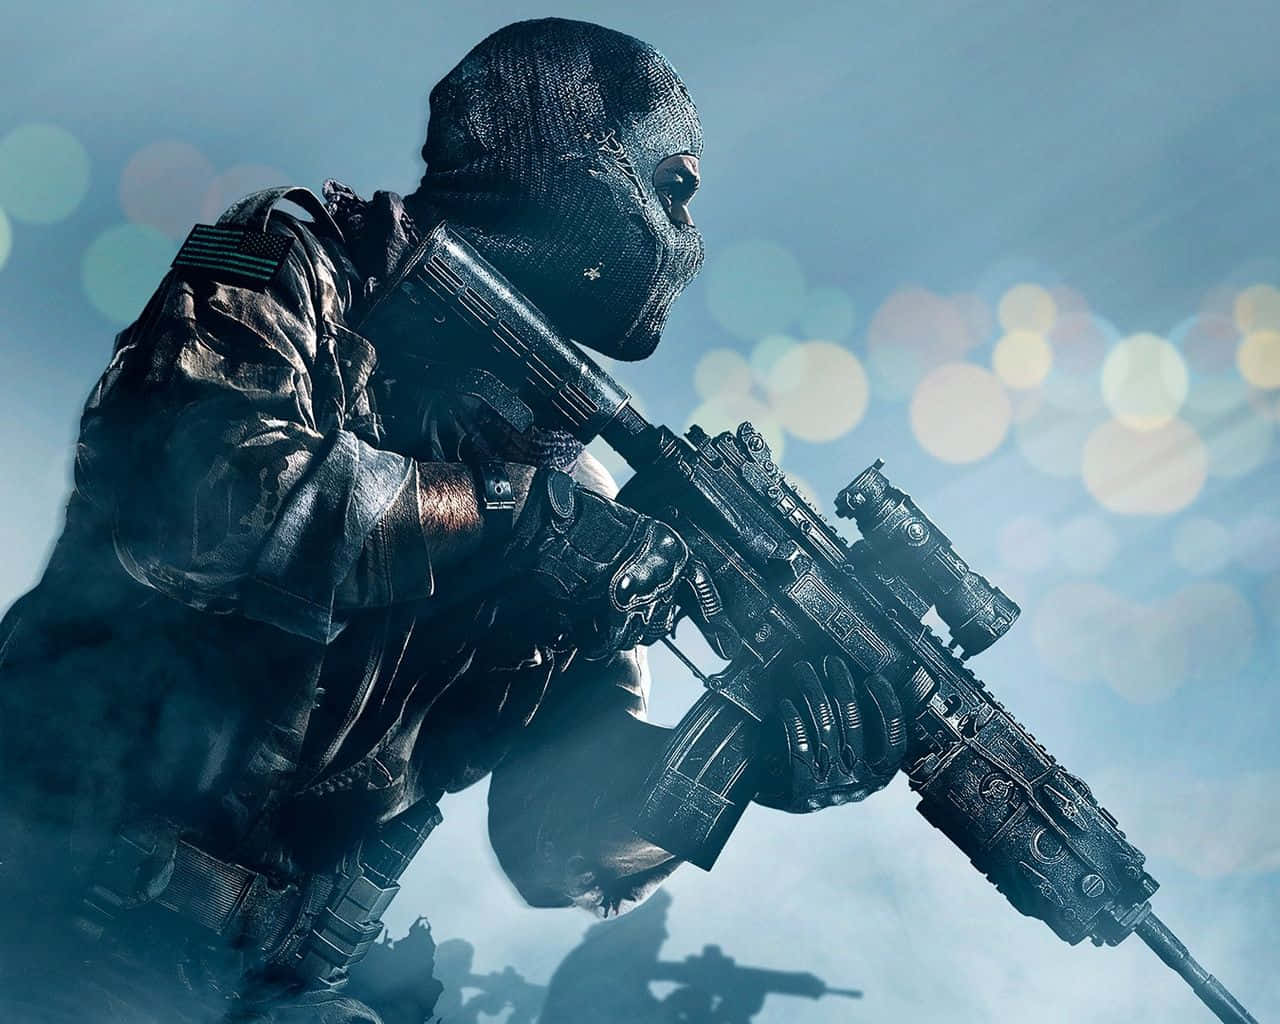 Call of Duty Ghosts - Intense Gaming Action Wallpaper